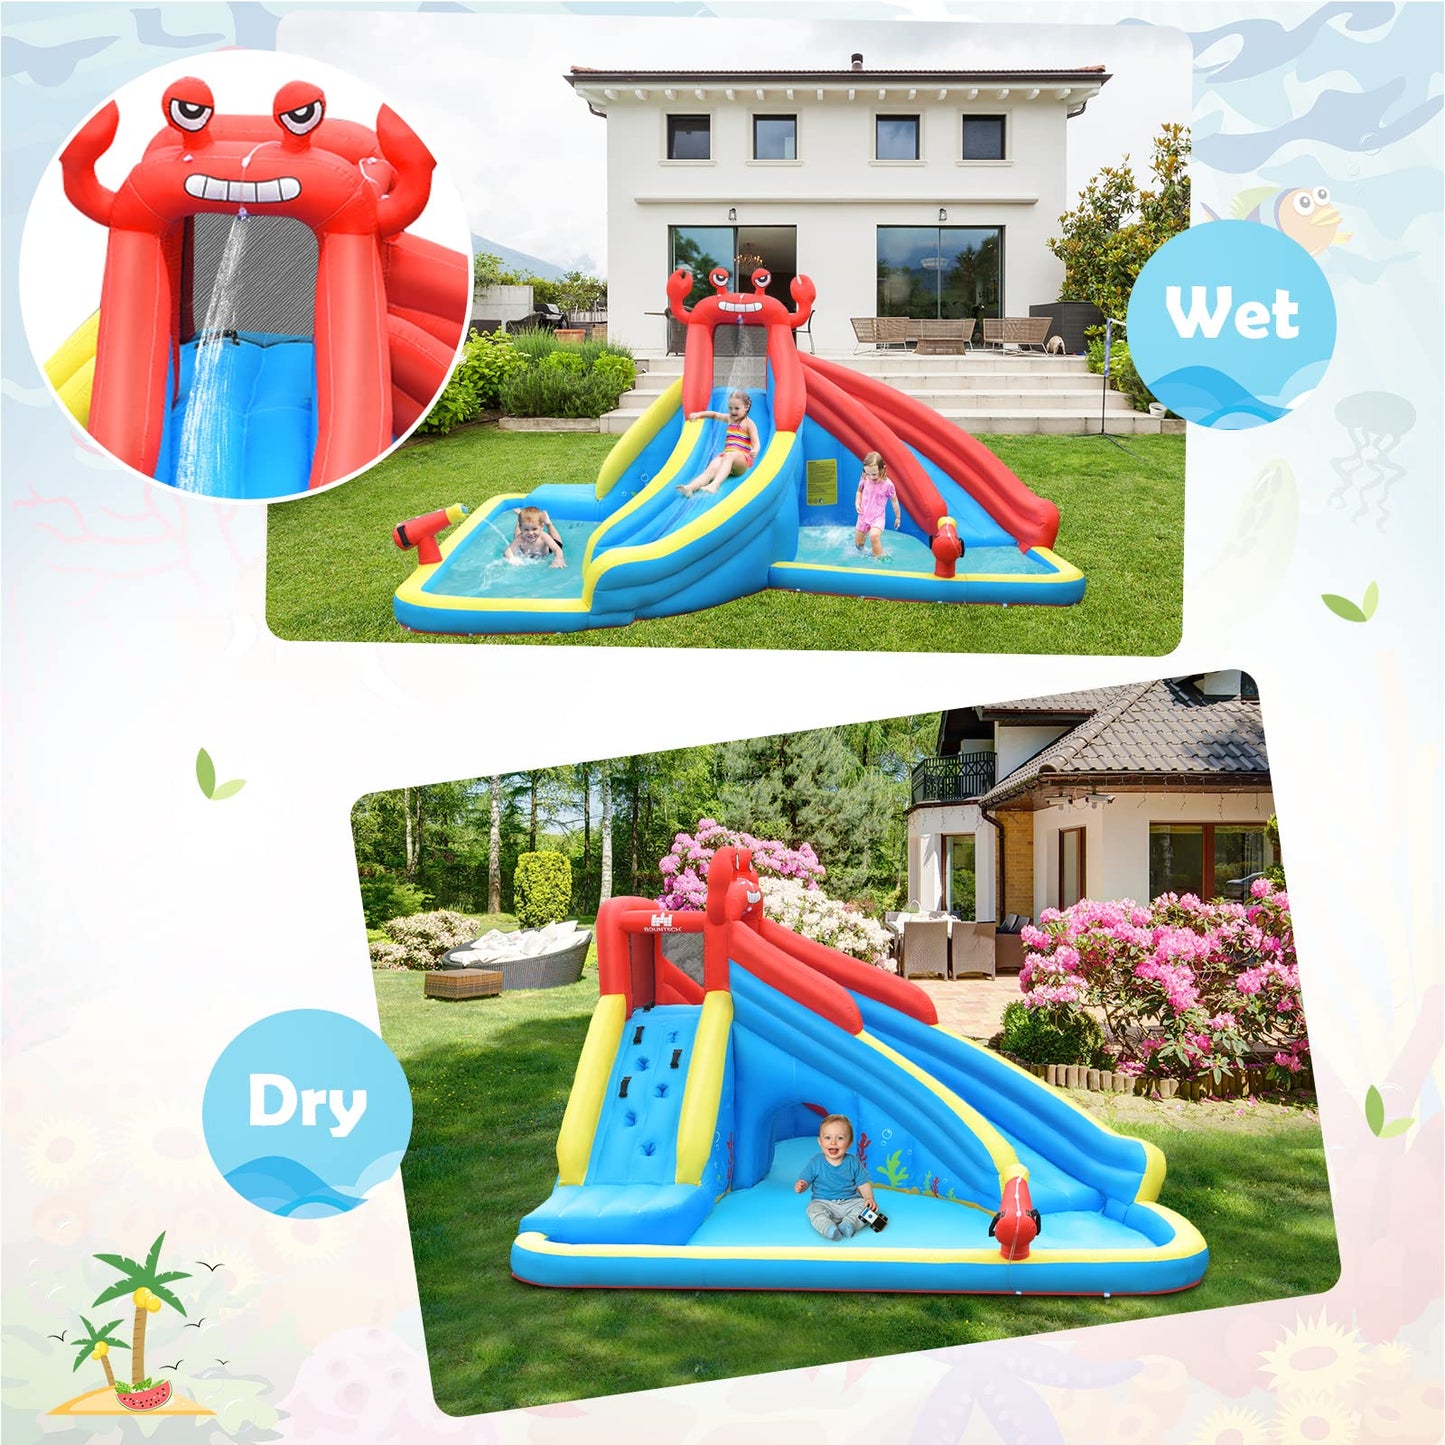 BOUNTECH Inflatable Water Slide, 7 in 1 Waterslide Park for Kids Outdoor Fun with Double Long Slide, 950w Blower, Splash Pool, Crab Theme Blow up Water Slides for Kids and Adults Backyard Party Gifts With 950W Air Blower